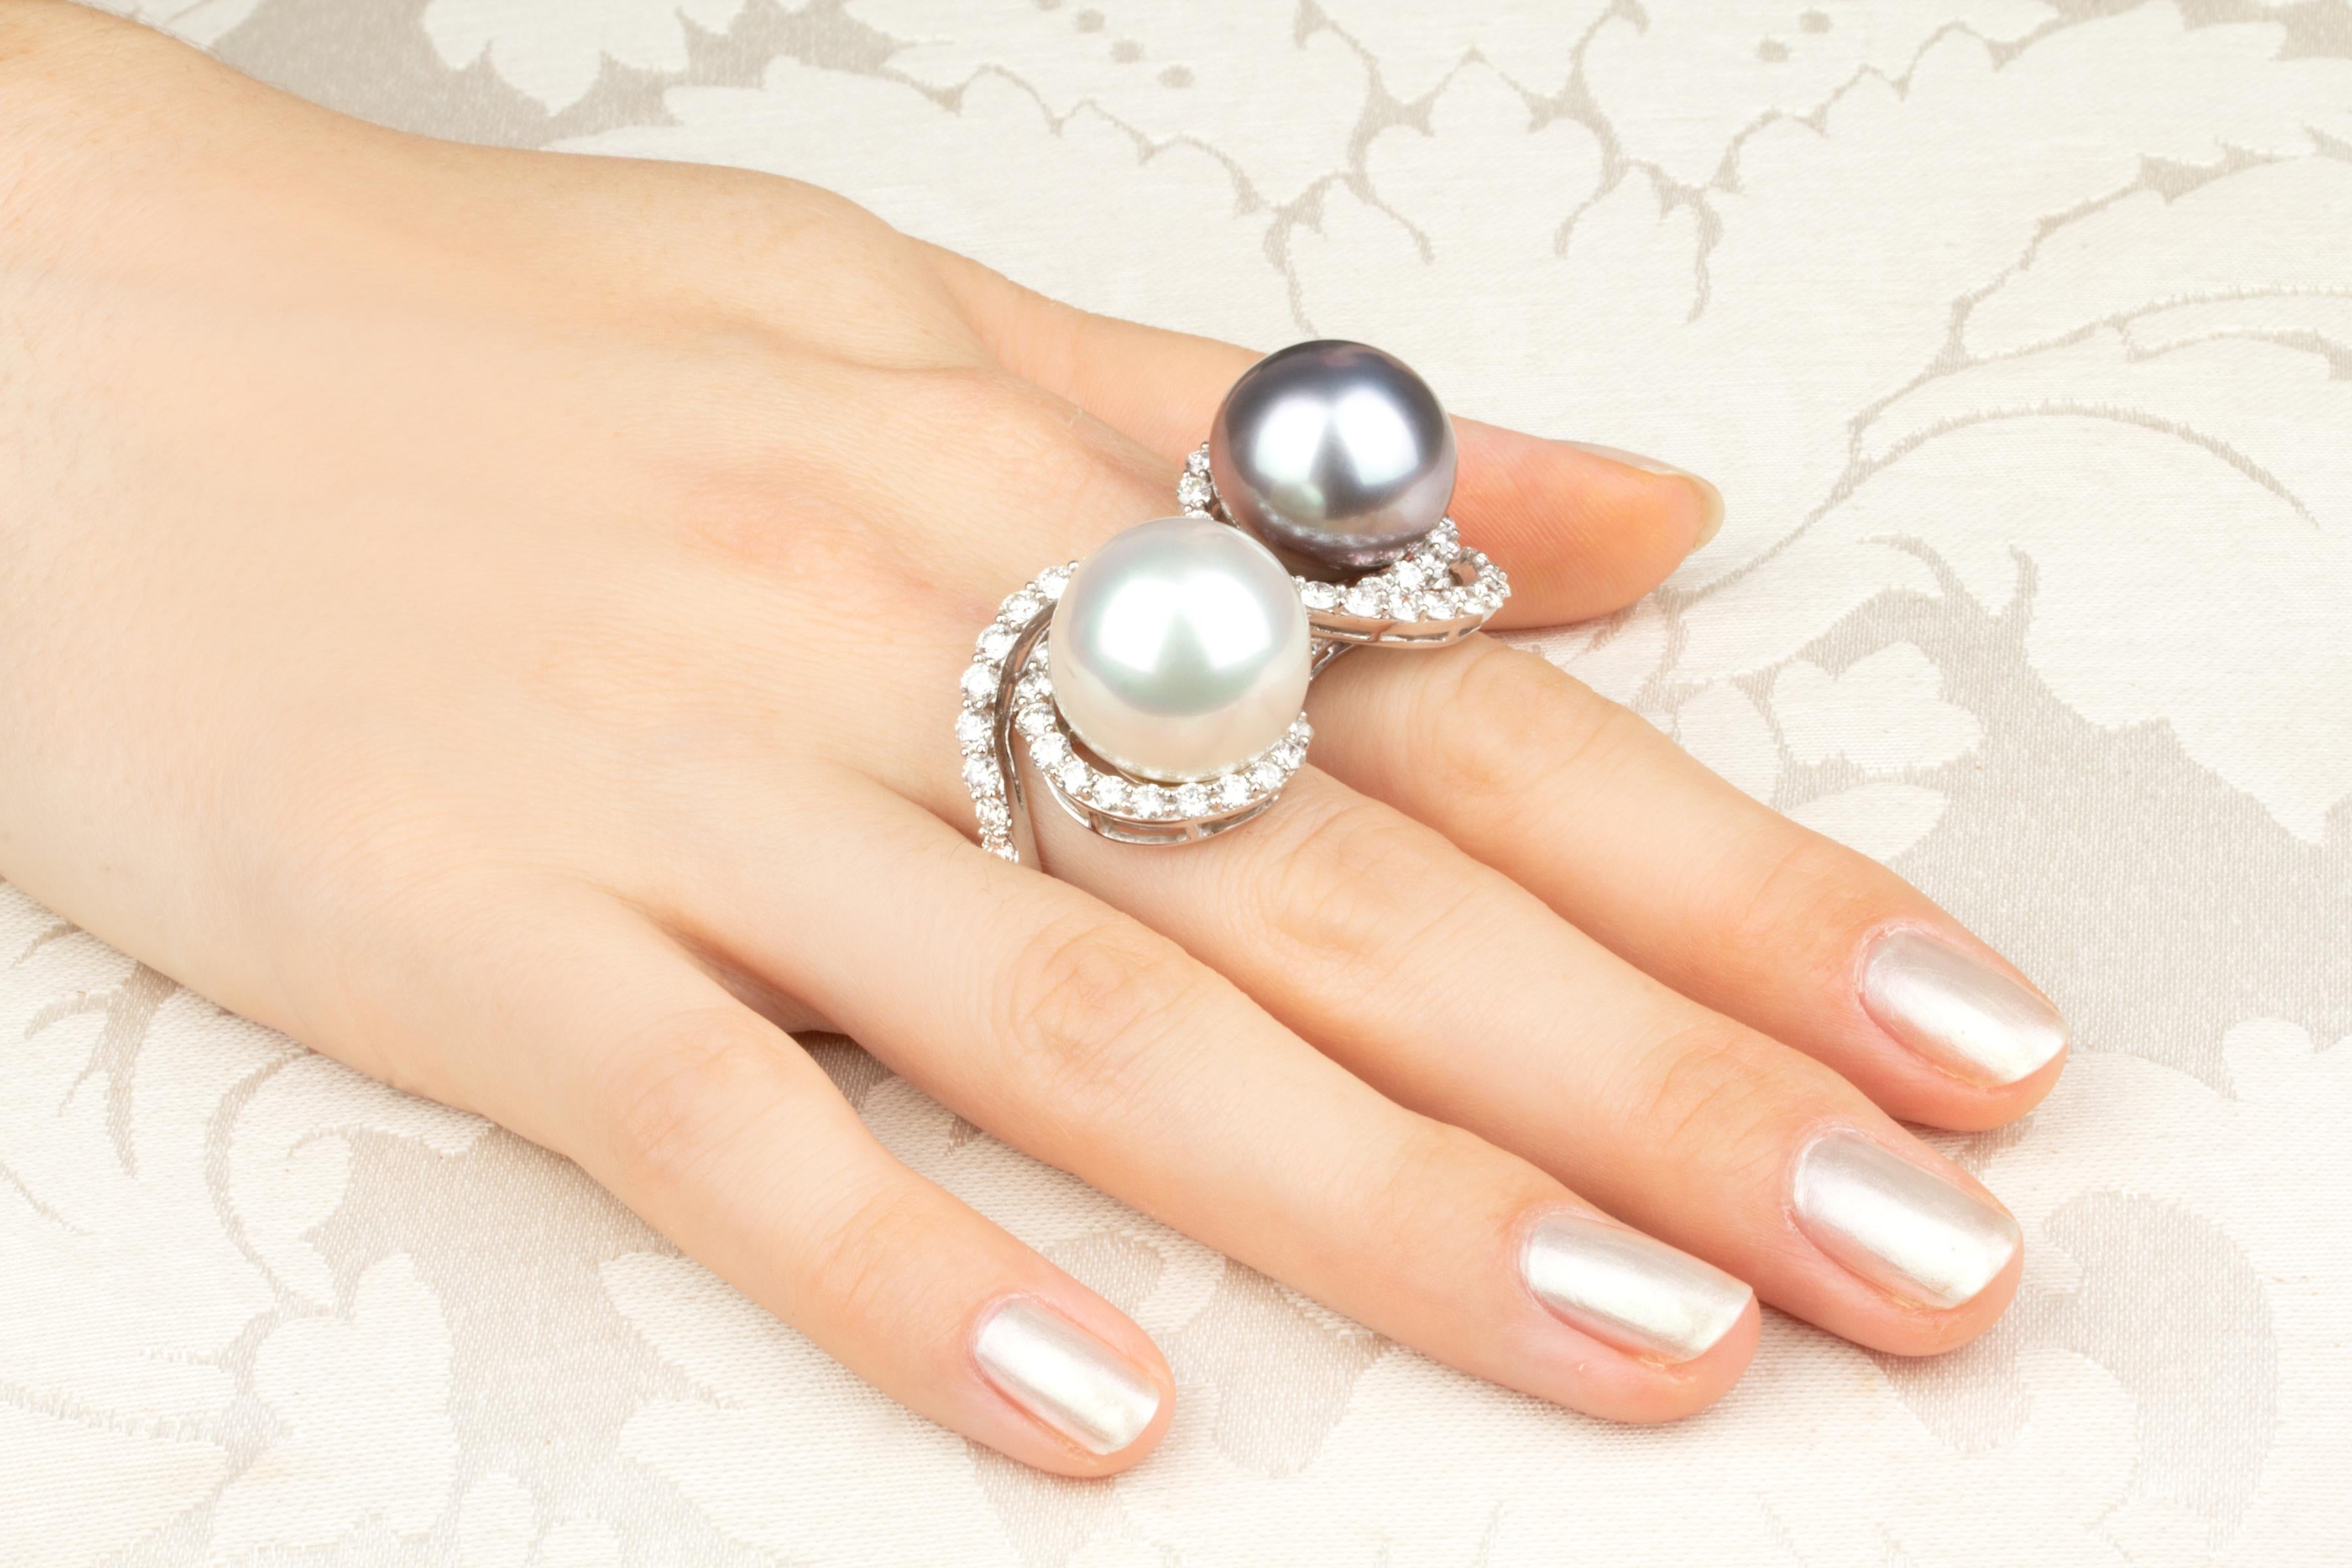 This pearl and diamond two-finger ring features a splendid South Sea pearl of 17.8mm diameter, and an equally splendid Tahitian pearl of 17.5mm diameter. The pearls are untreated. They display a fine nacre and their natural color and luster have not